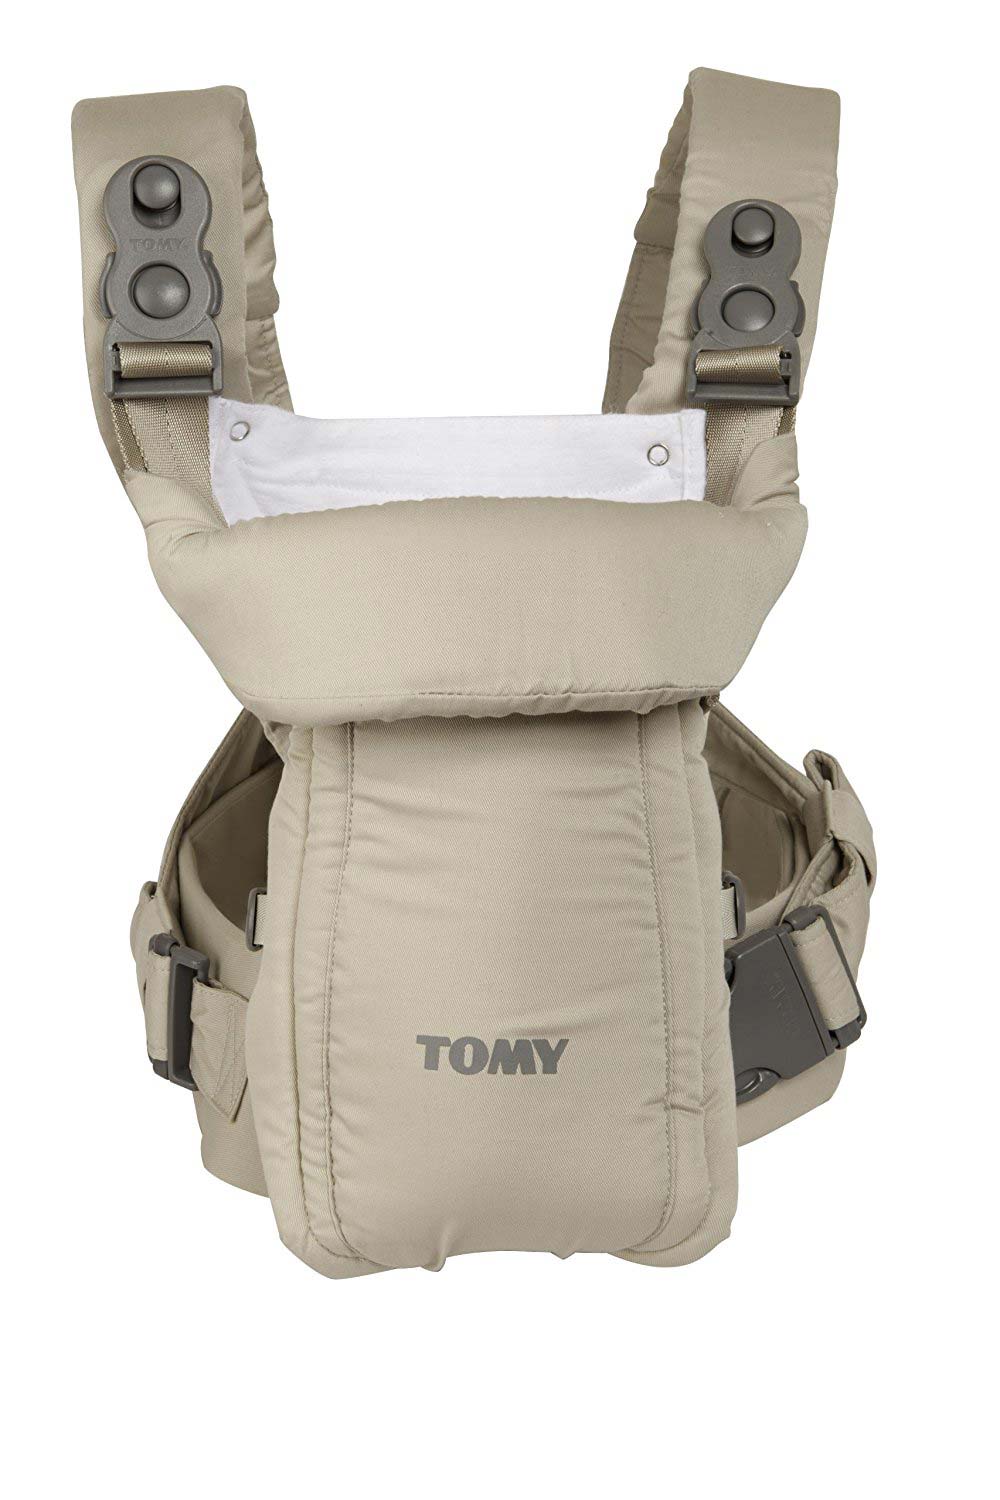 Tomy Freestyle Classic Carrier Review 